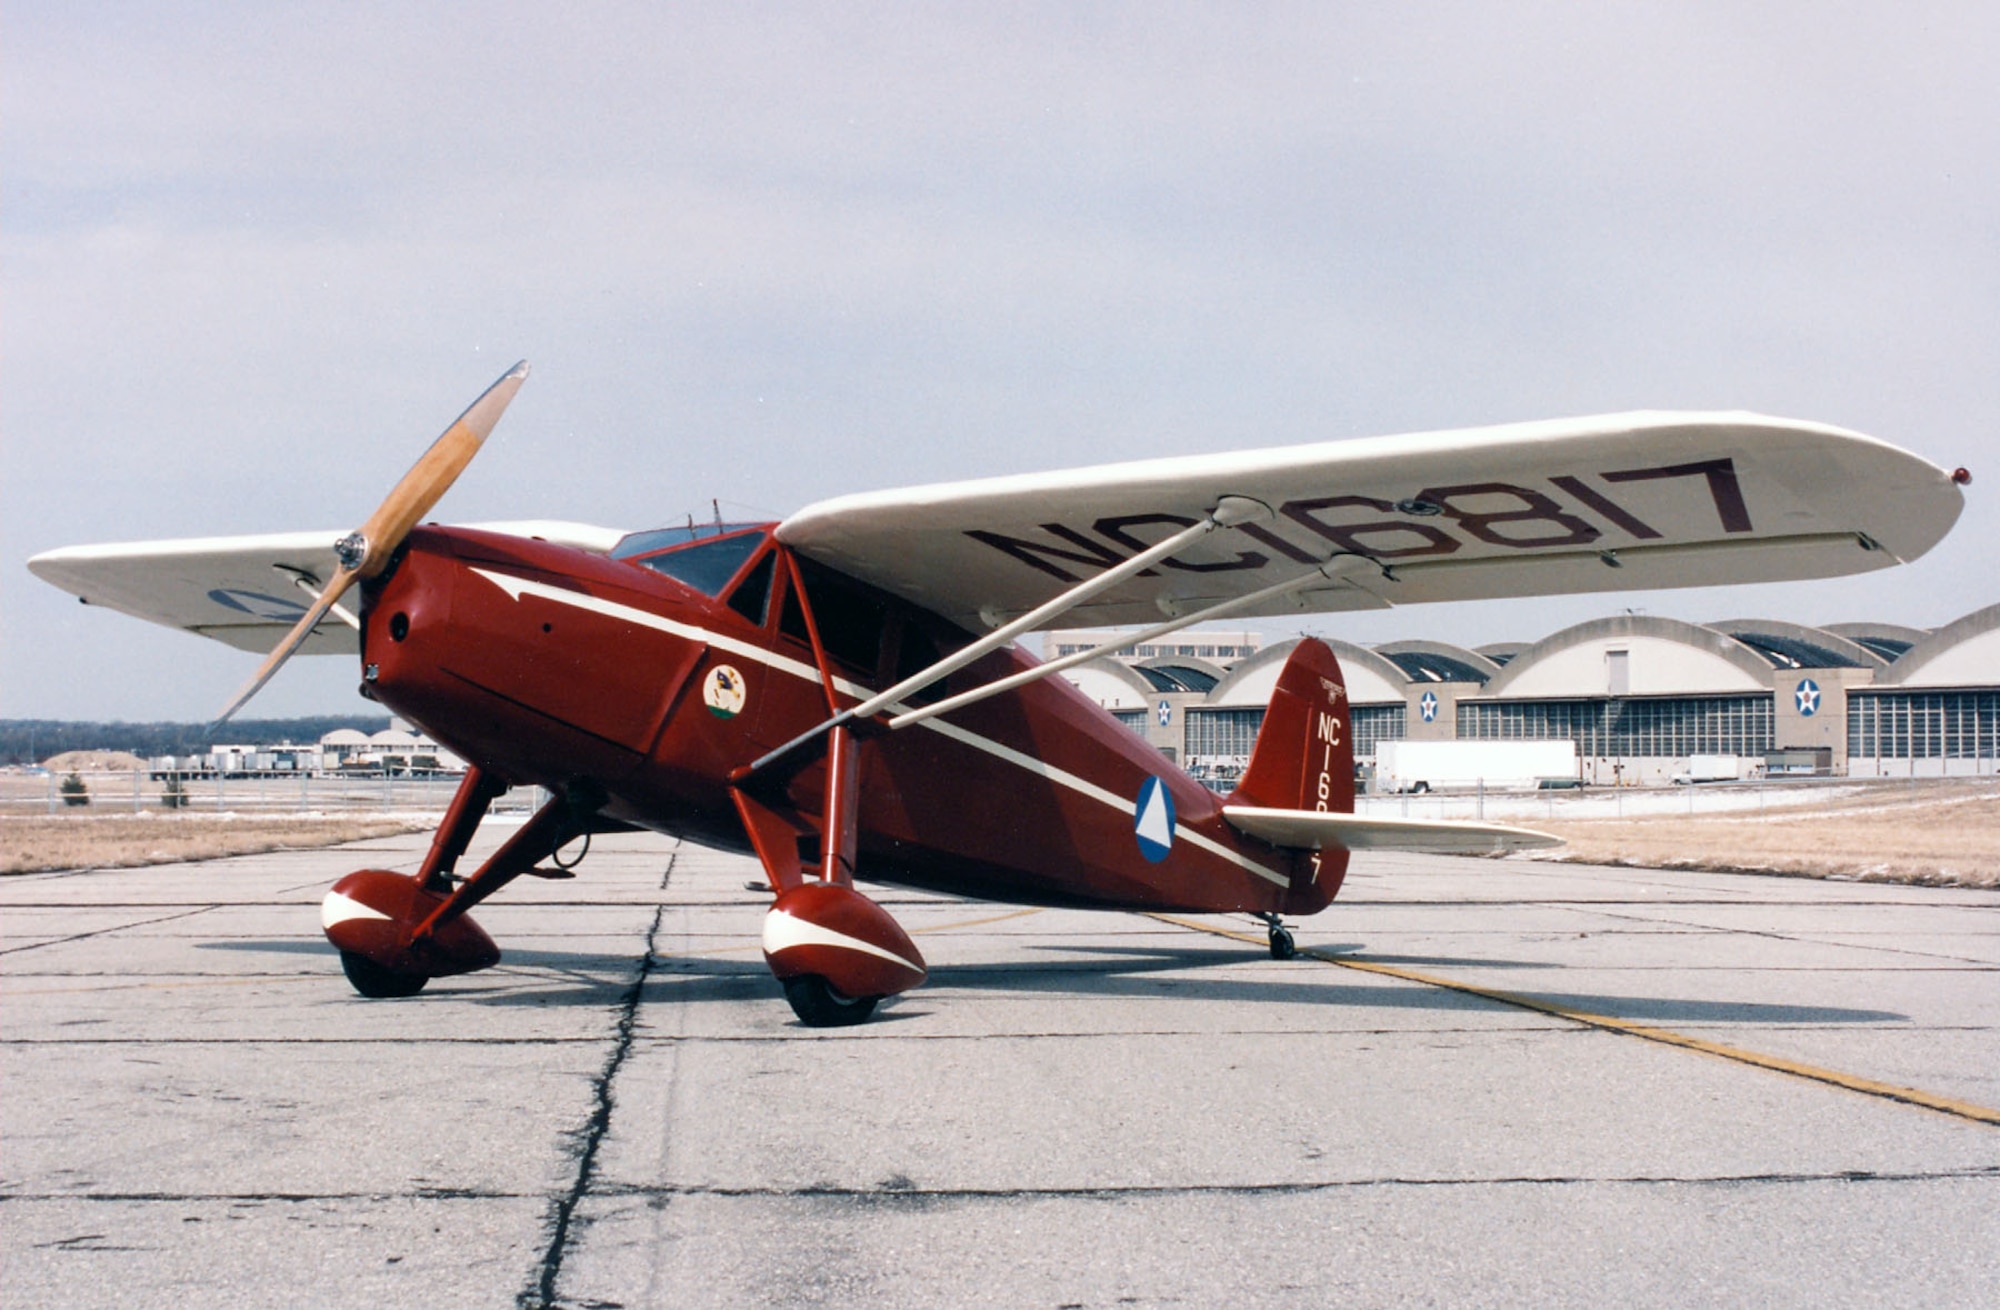 DAYTON, Ohio -- Fairchild Model 24-C8F (UC-61J) at the National Museum of the United States Air Force. (U.S. Air Force photo)